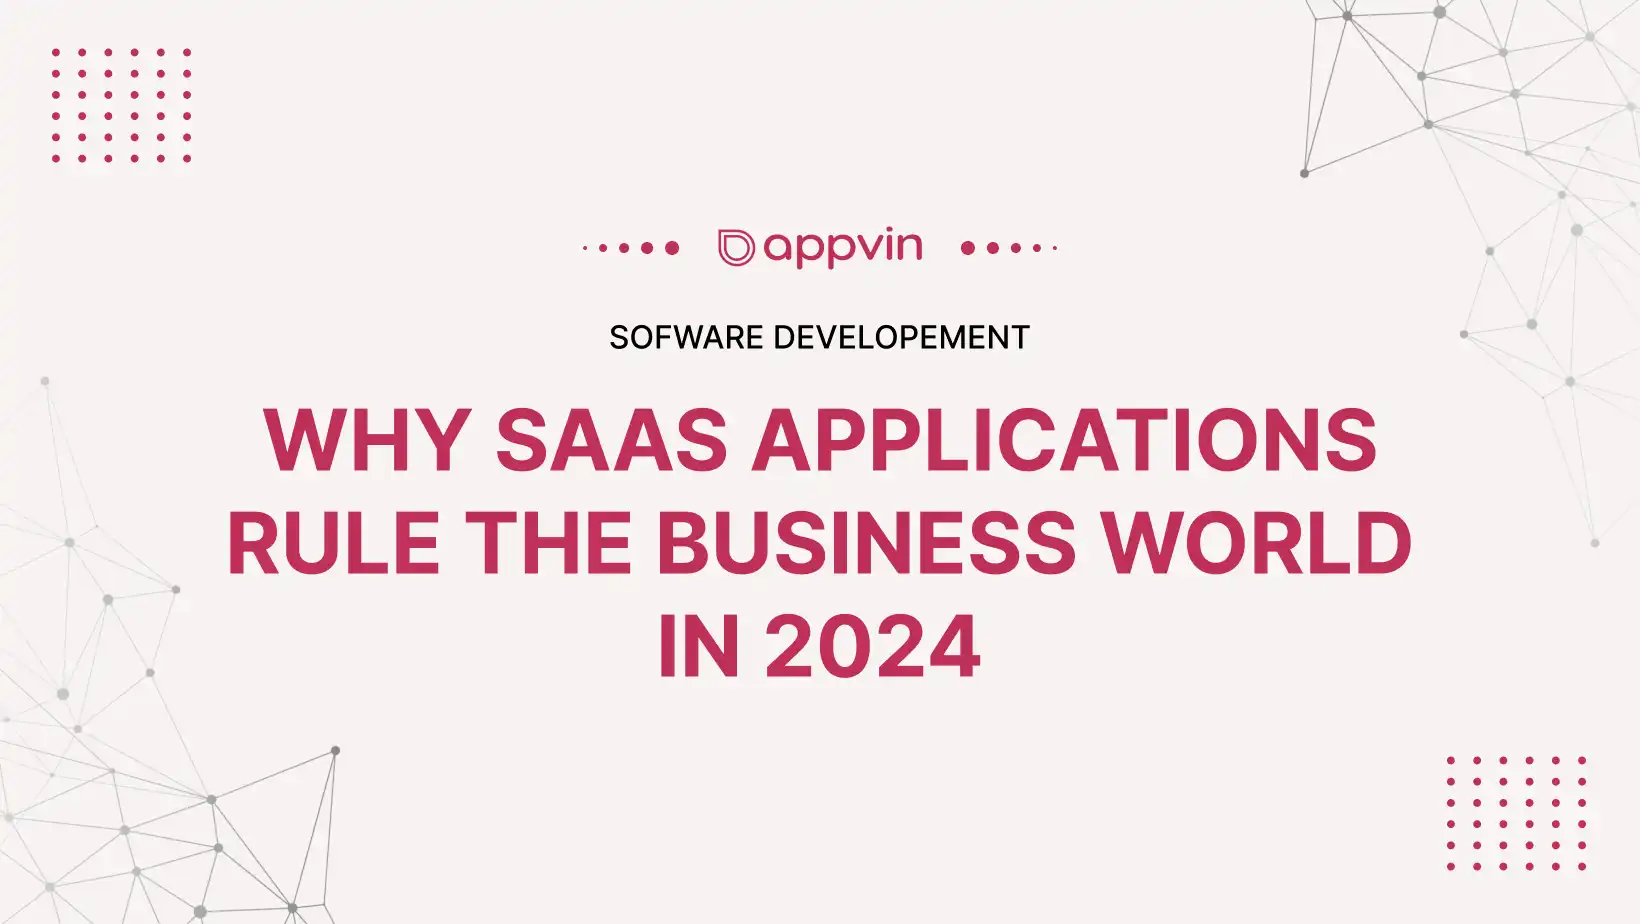 Why SaaS Applications Rule the Business World in 2024